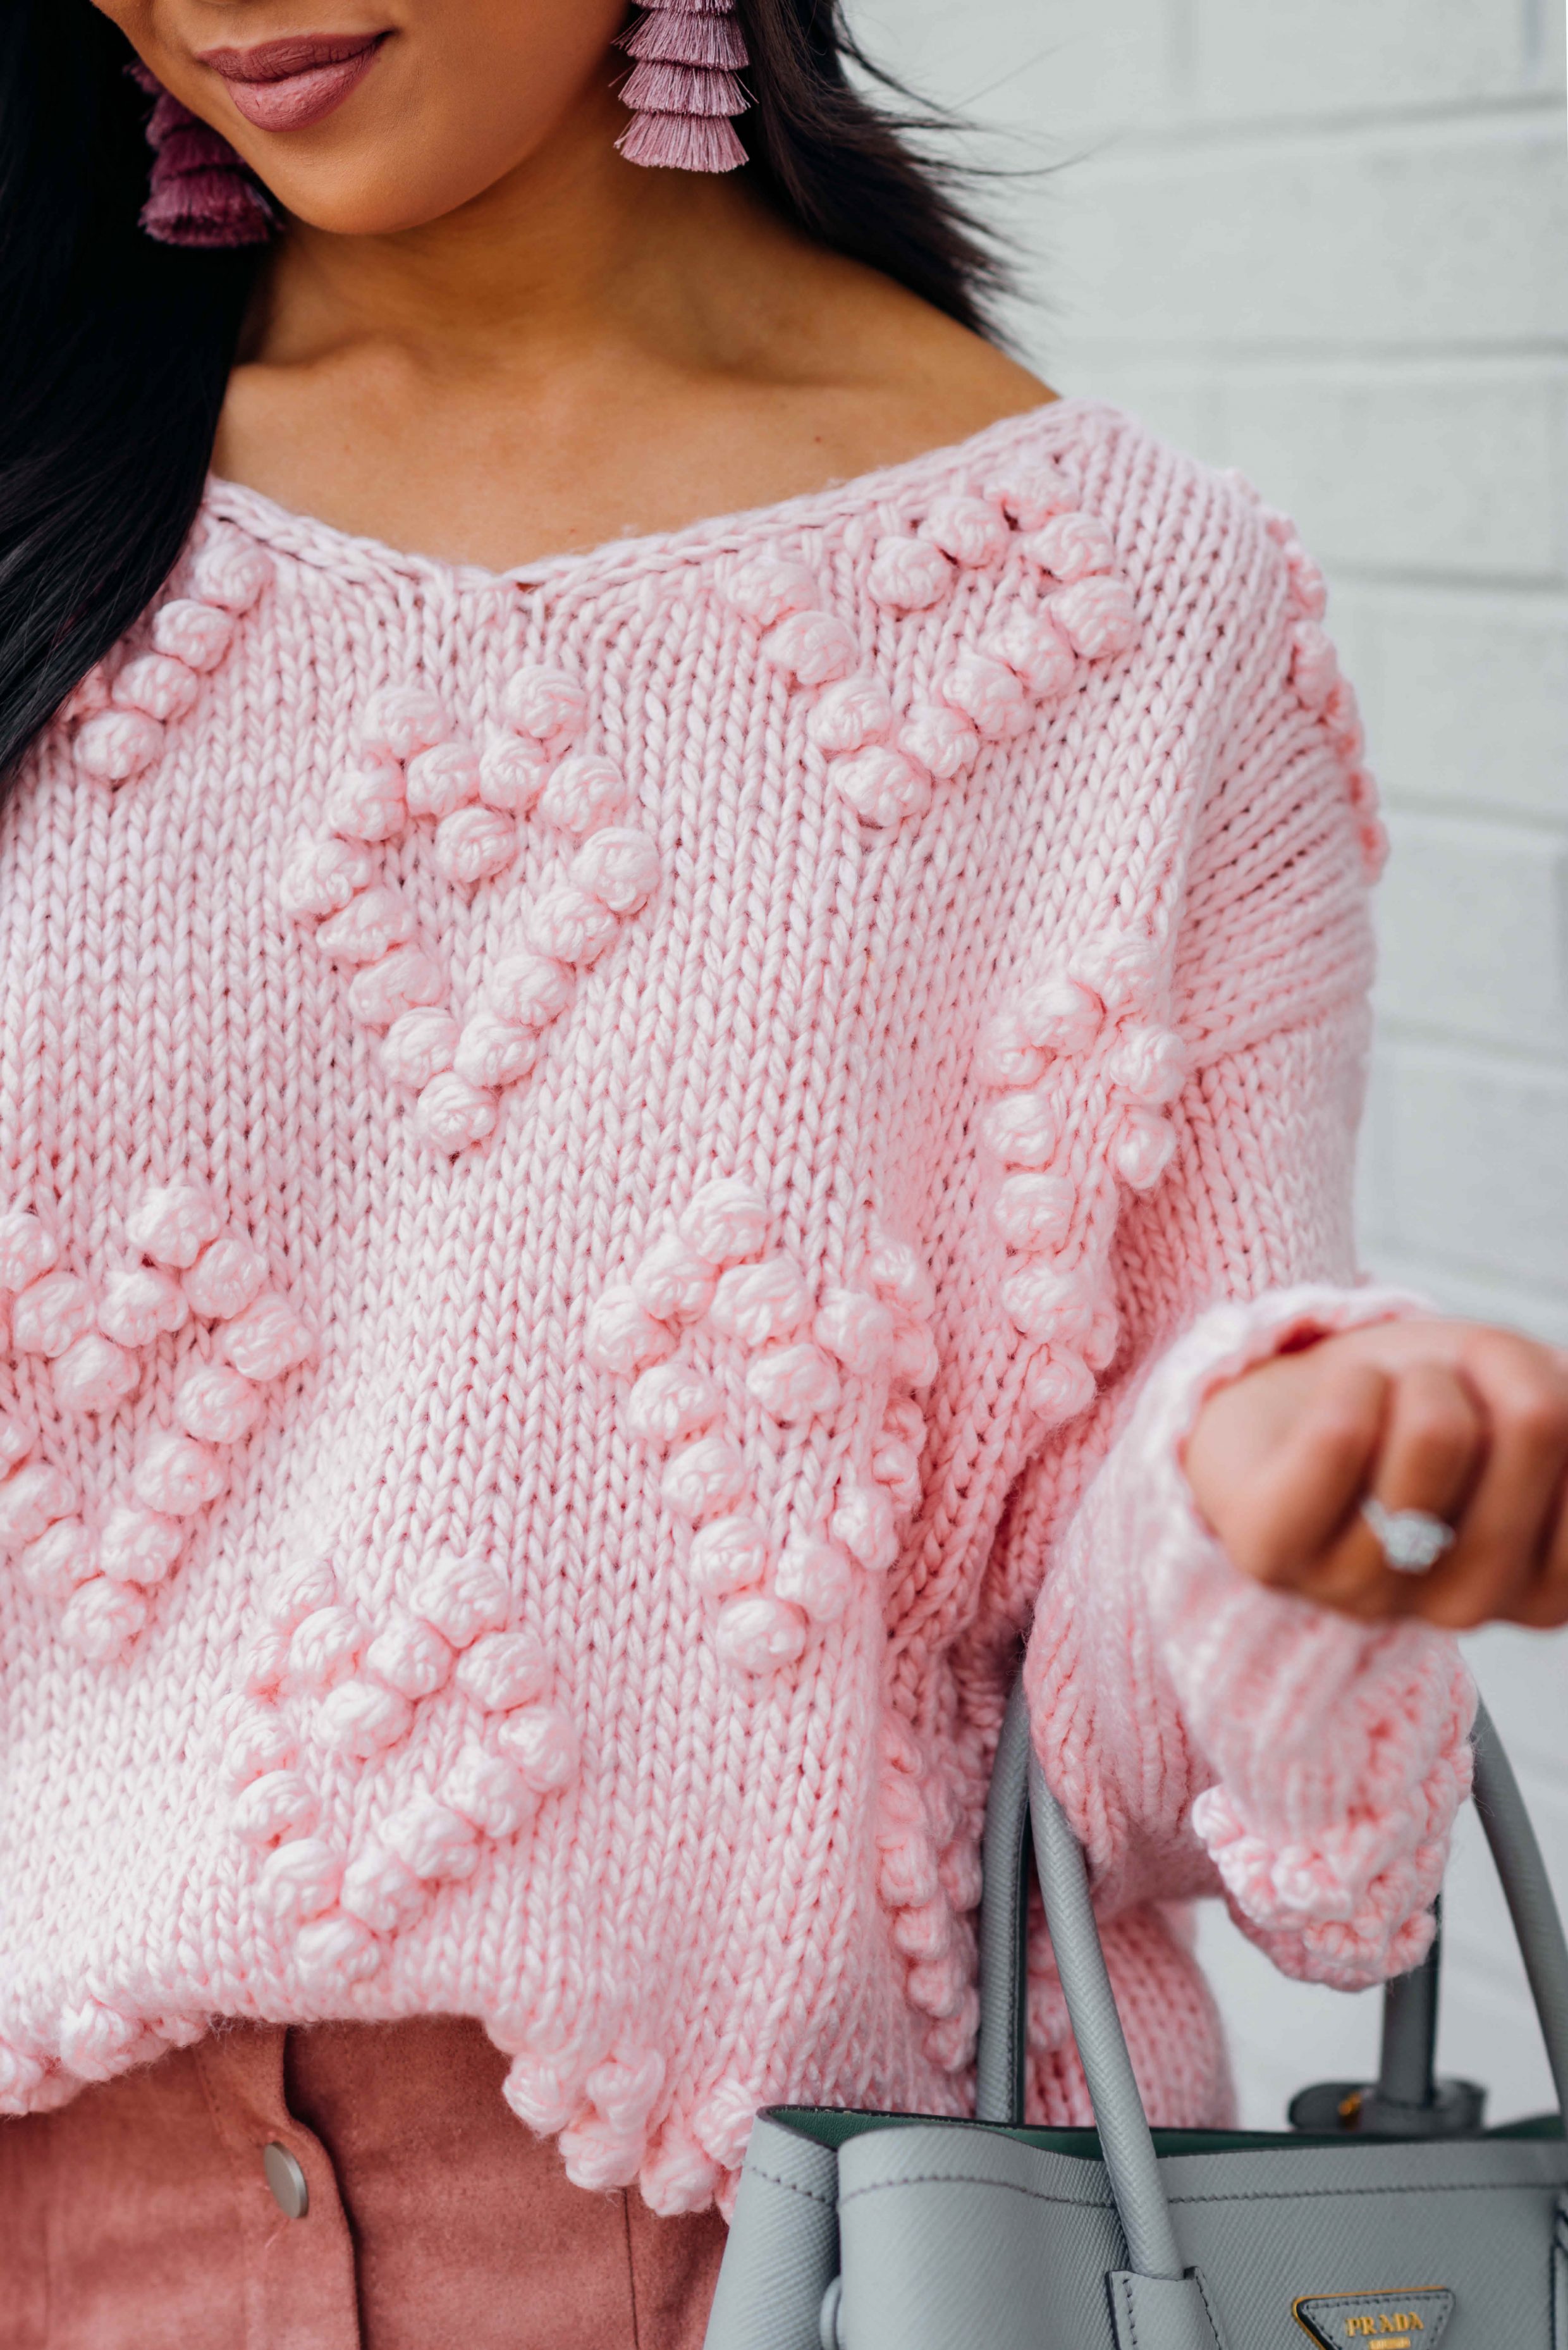 Blogger Hoang-Kim wears a pink sweater with heart pom poms